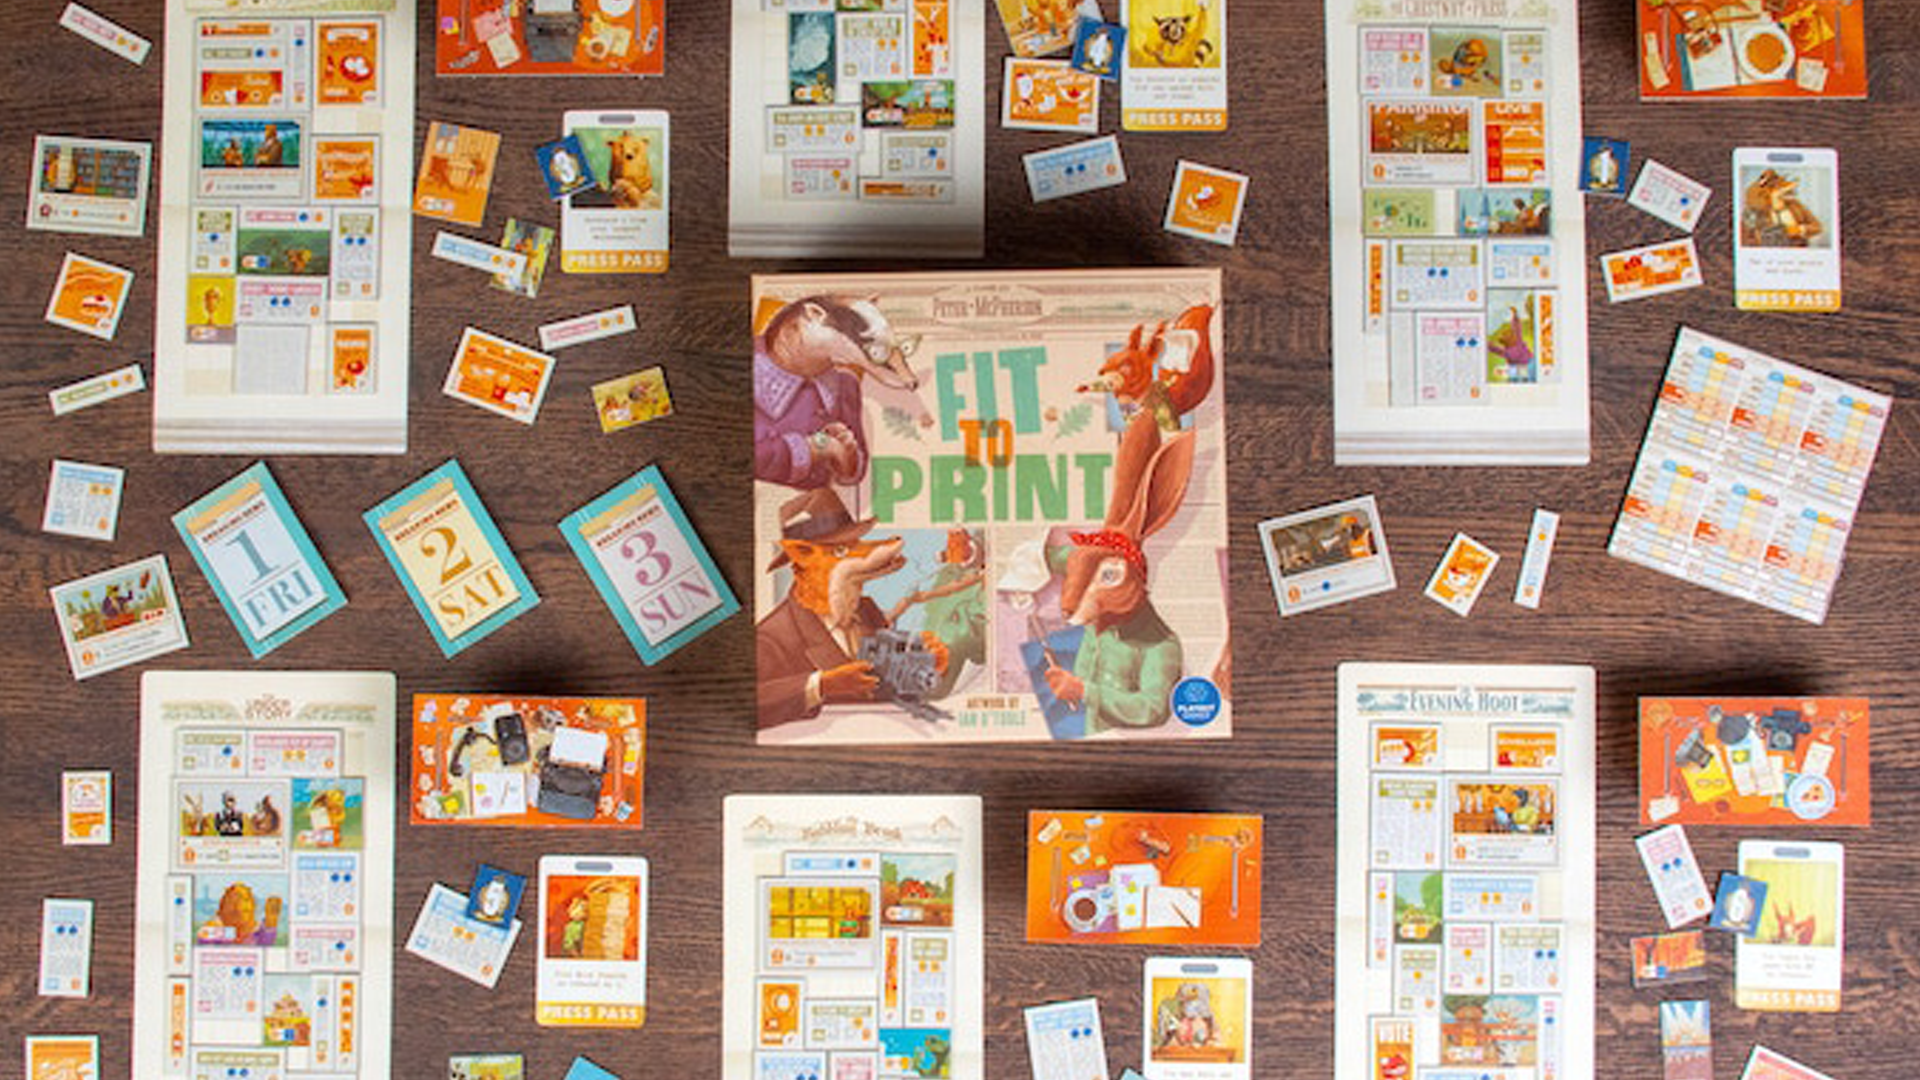 A layout image of the board and cards for Fit to Print.